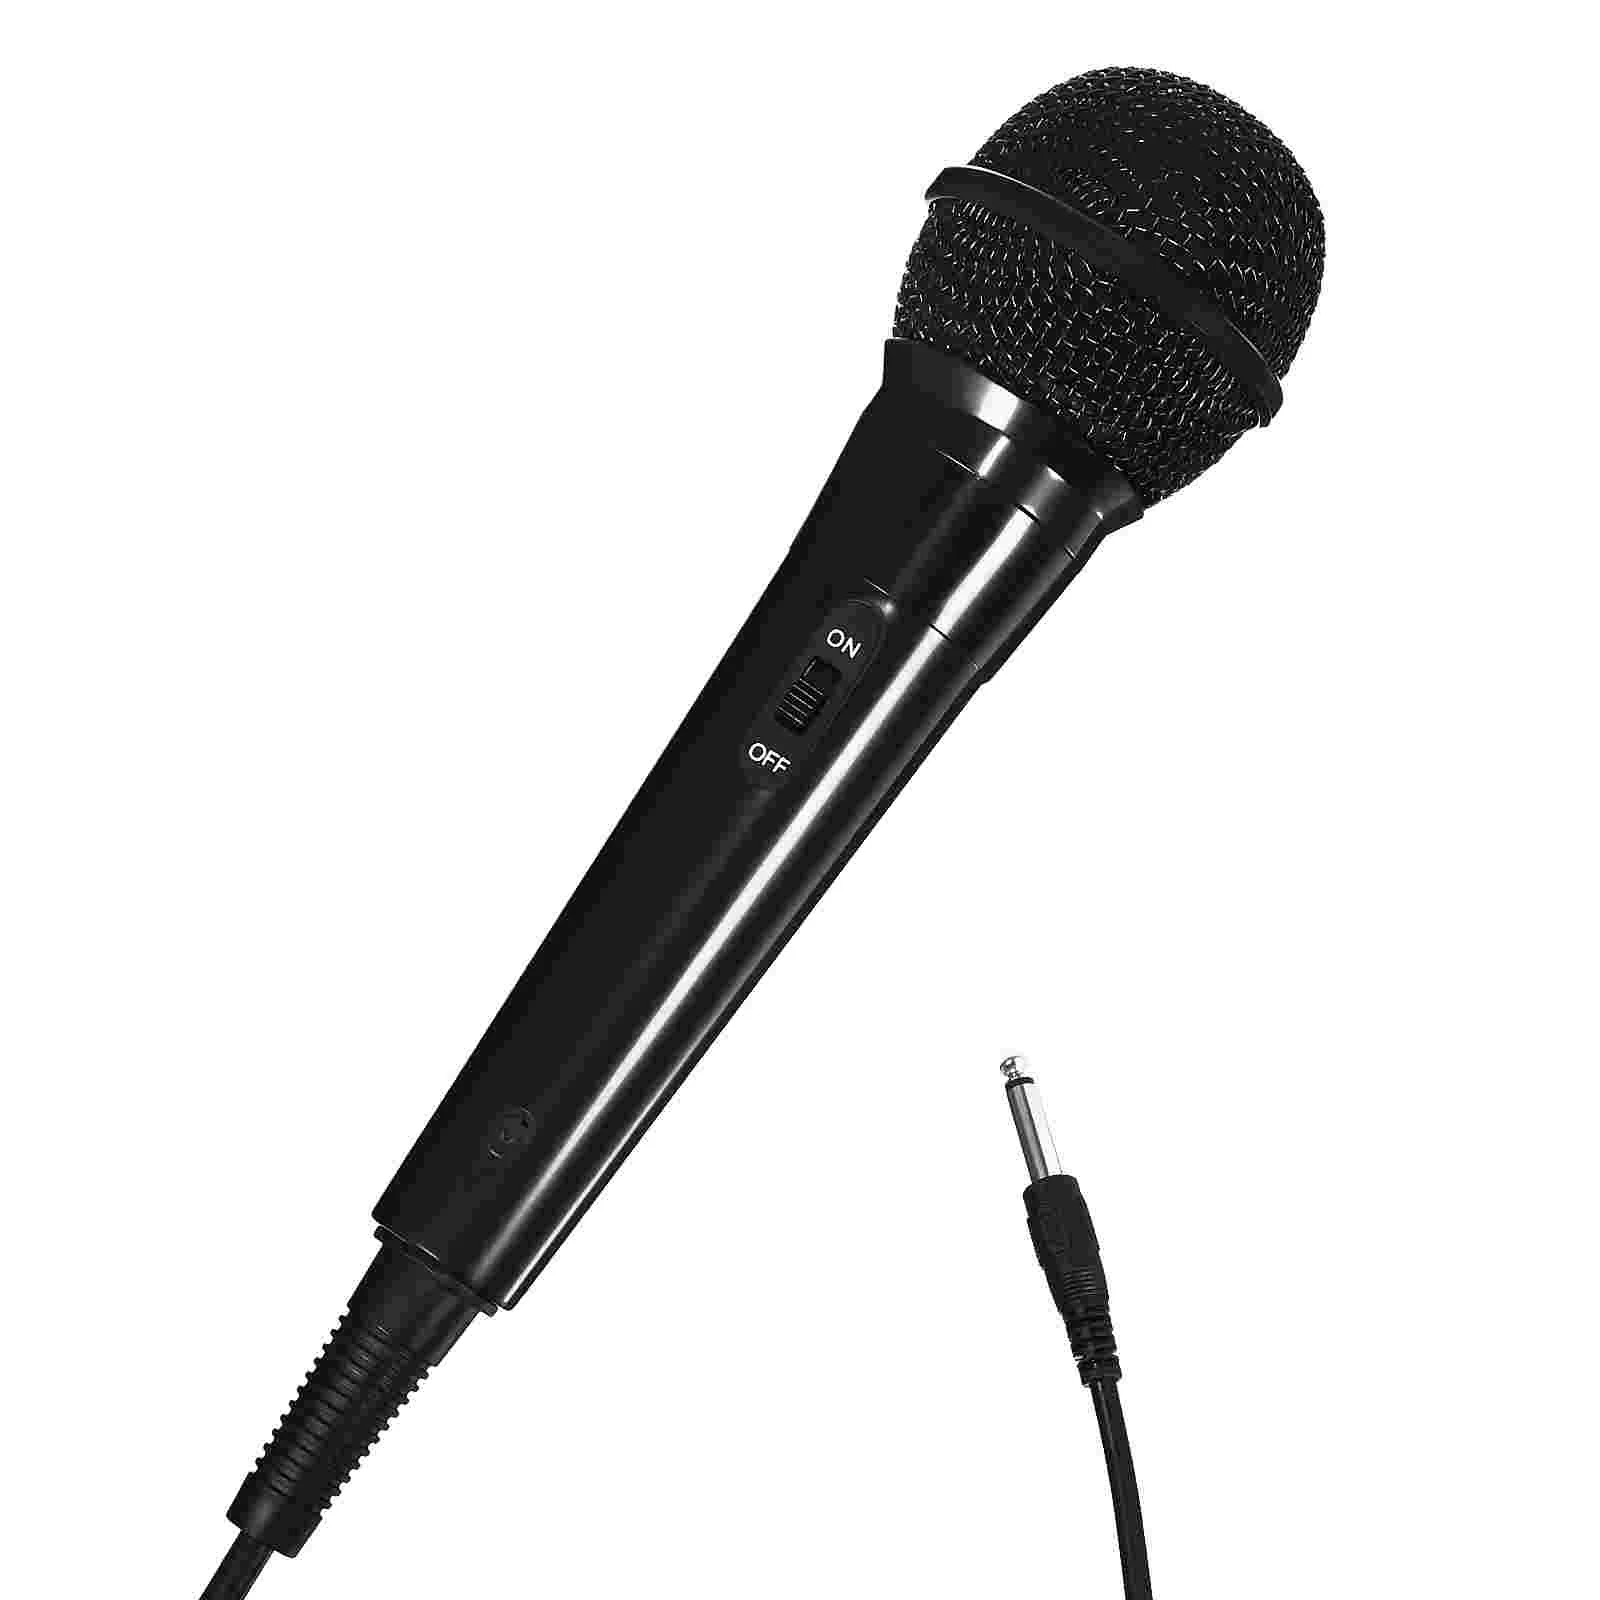 

Wired Microphone Singing Recording Microphone Computer Microphone for Live Streaming 6.5mm Dynamic Handheld Microphones Karaoke